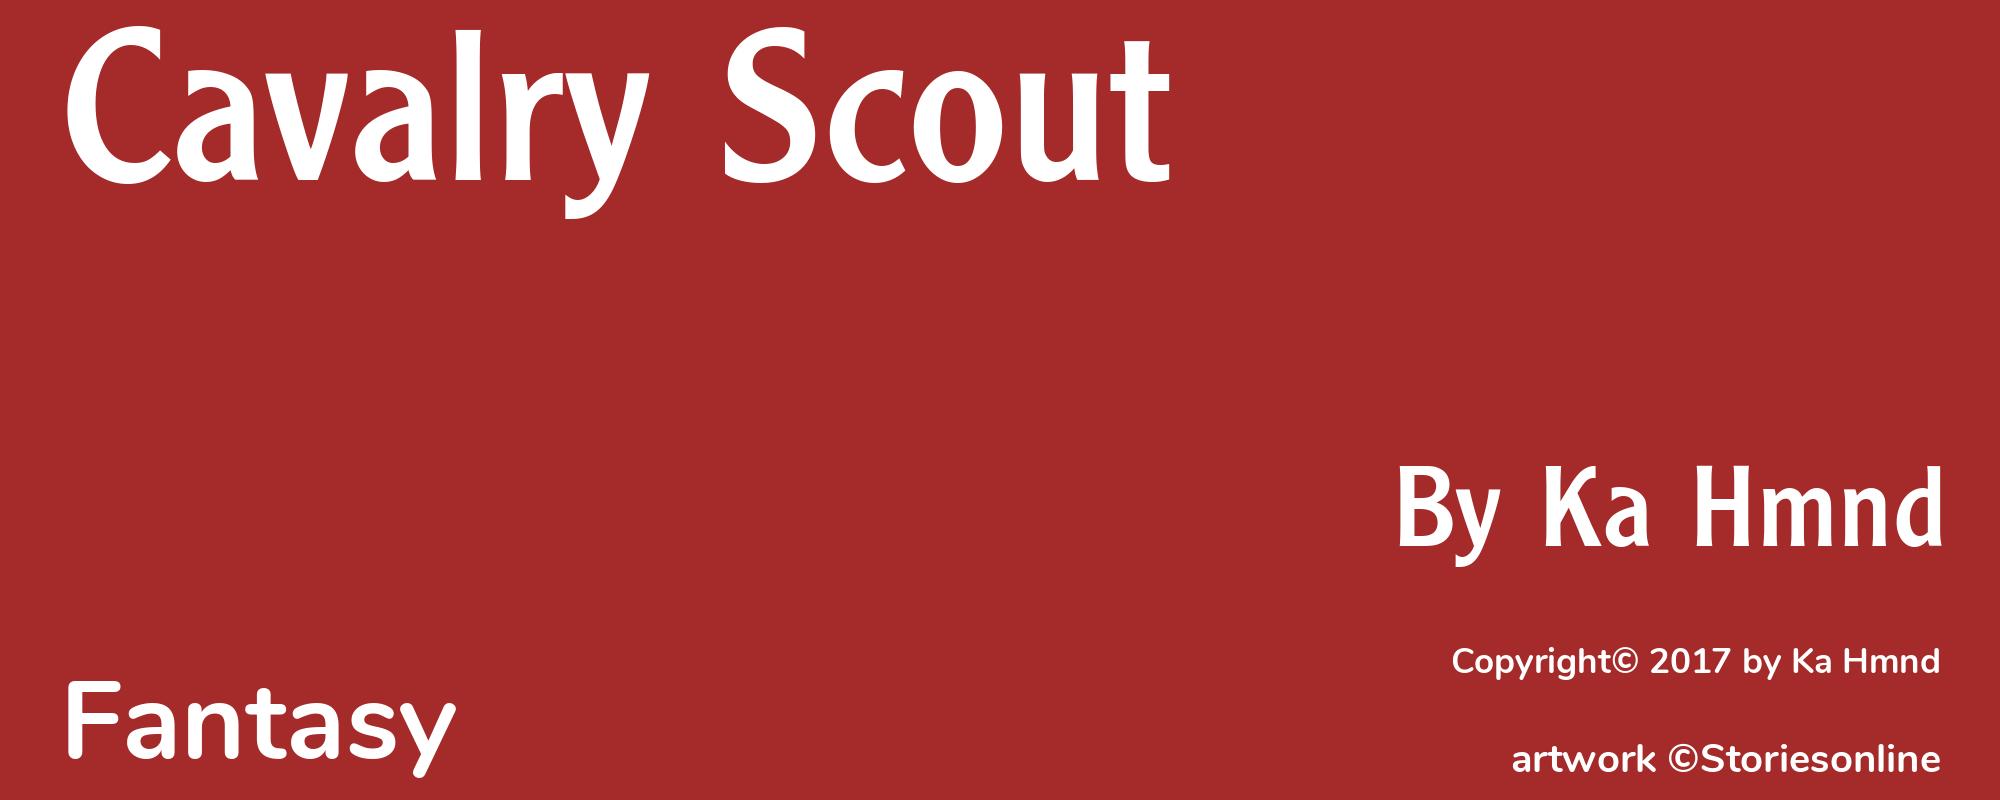 Cavalry Scout - Cover